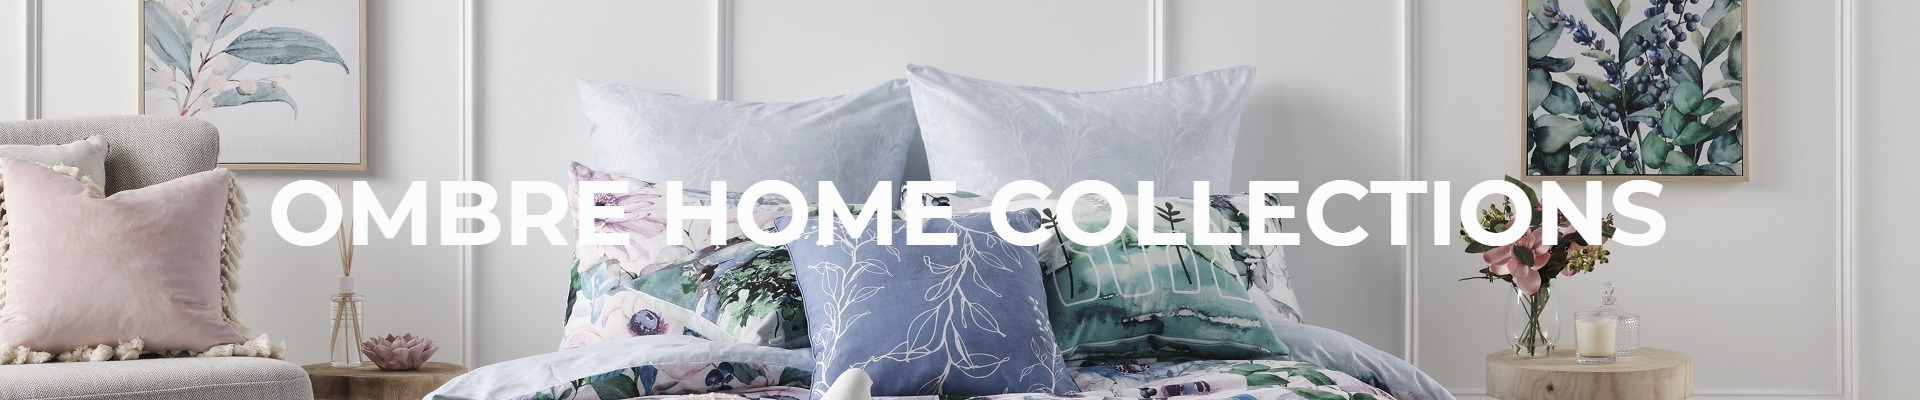 Shop Our Ombre Home Collections